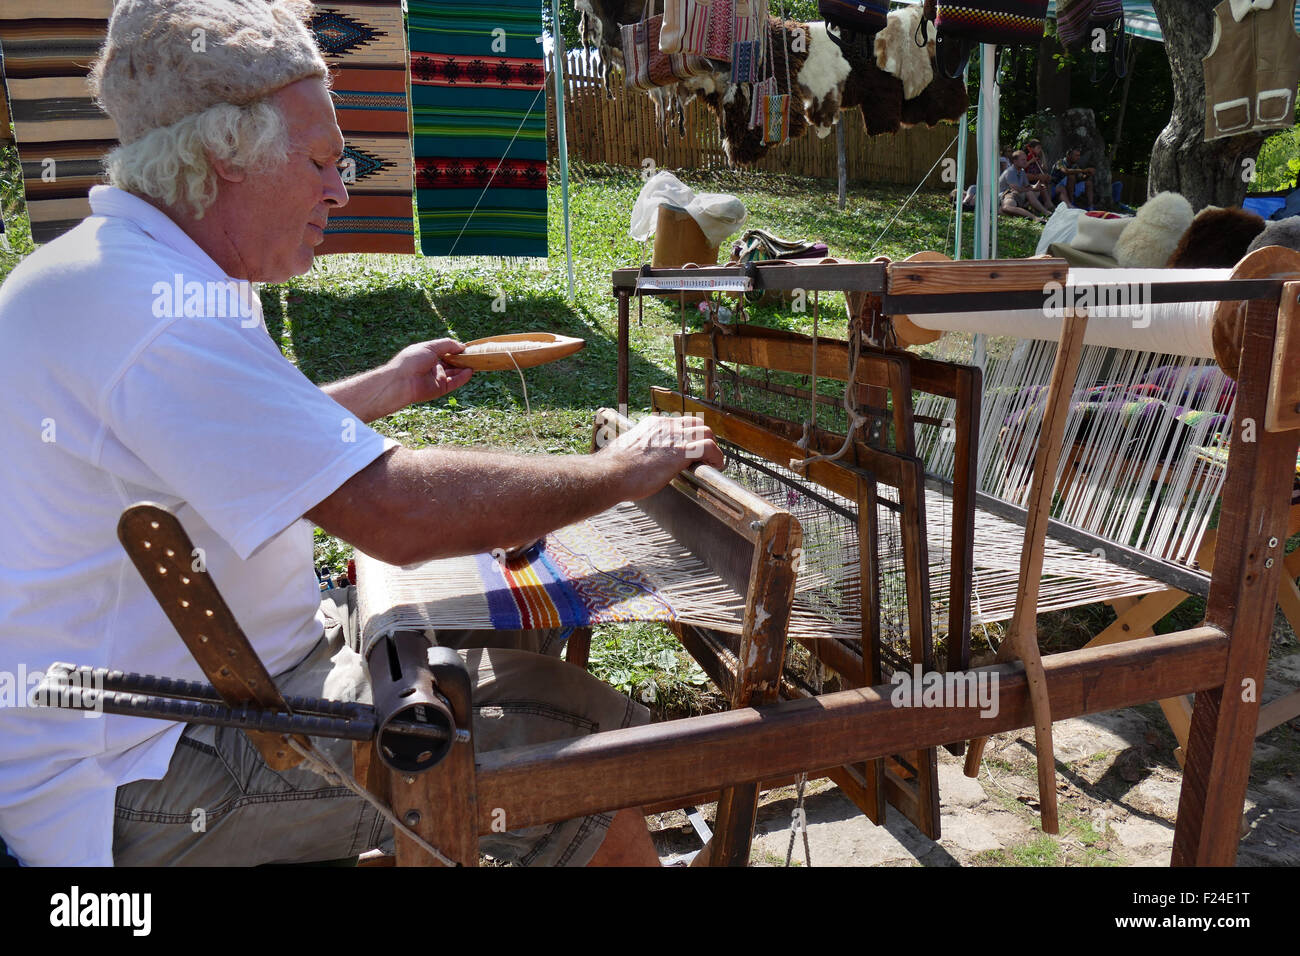 Craftsman weaves a hand loom. Stock Photo